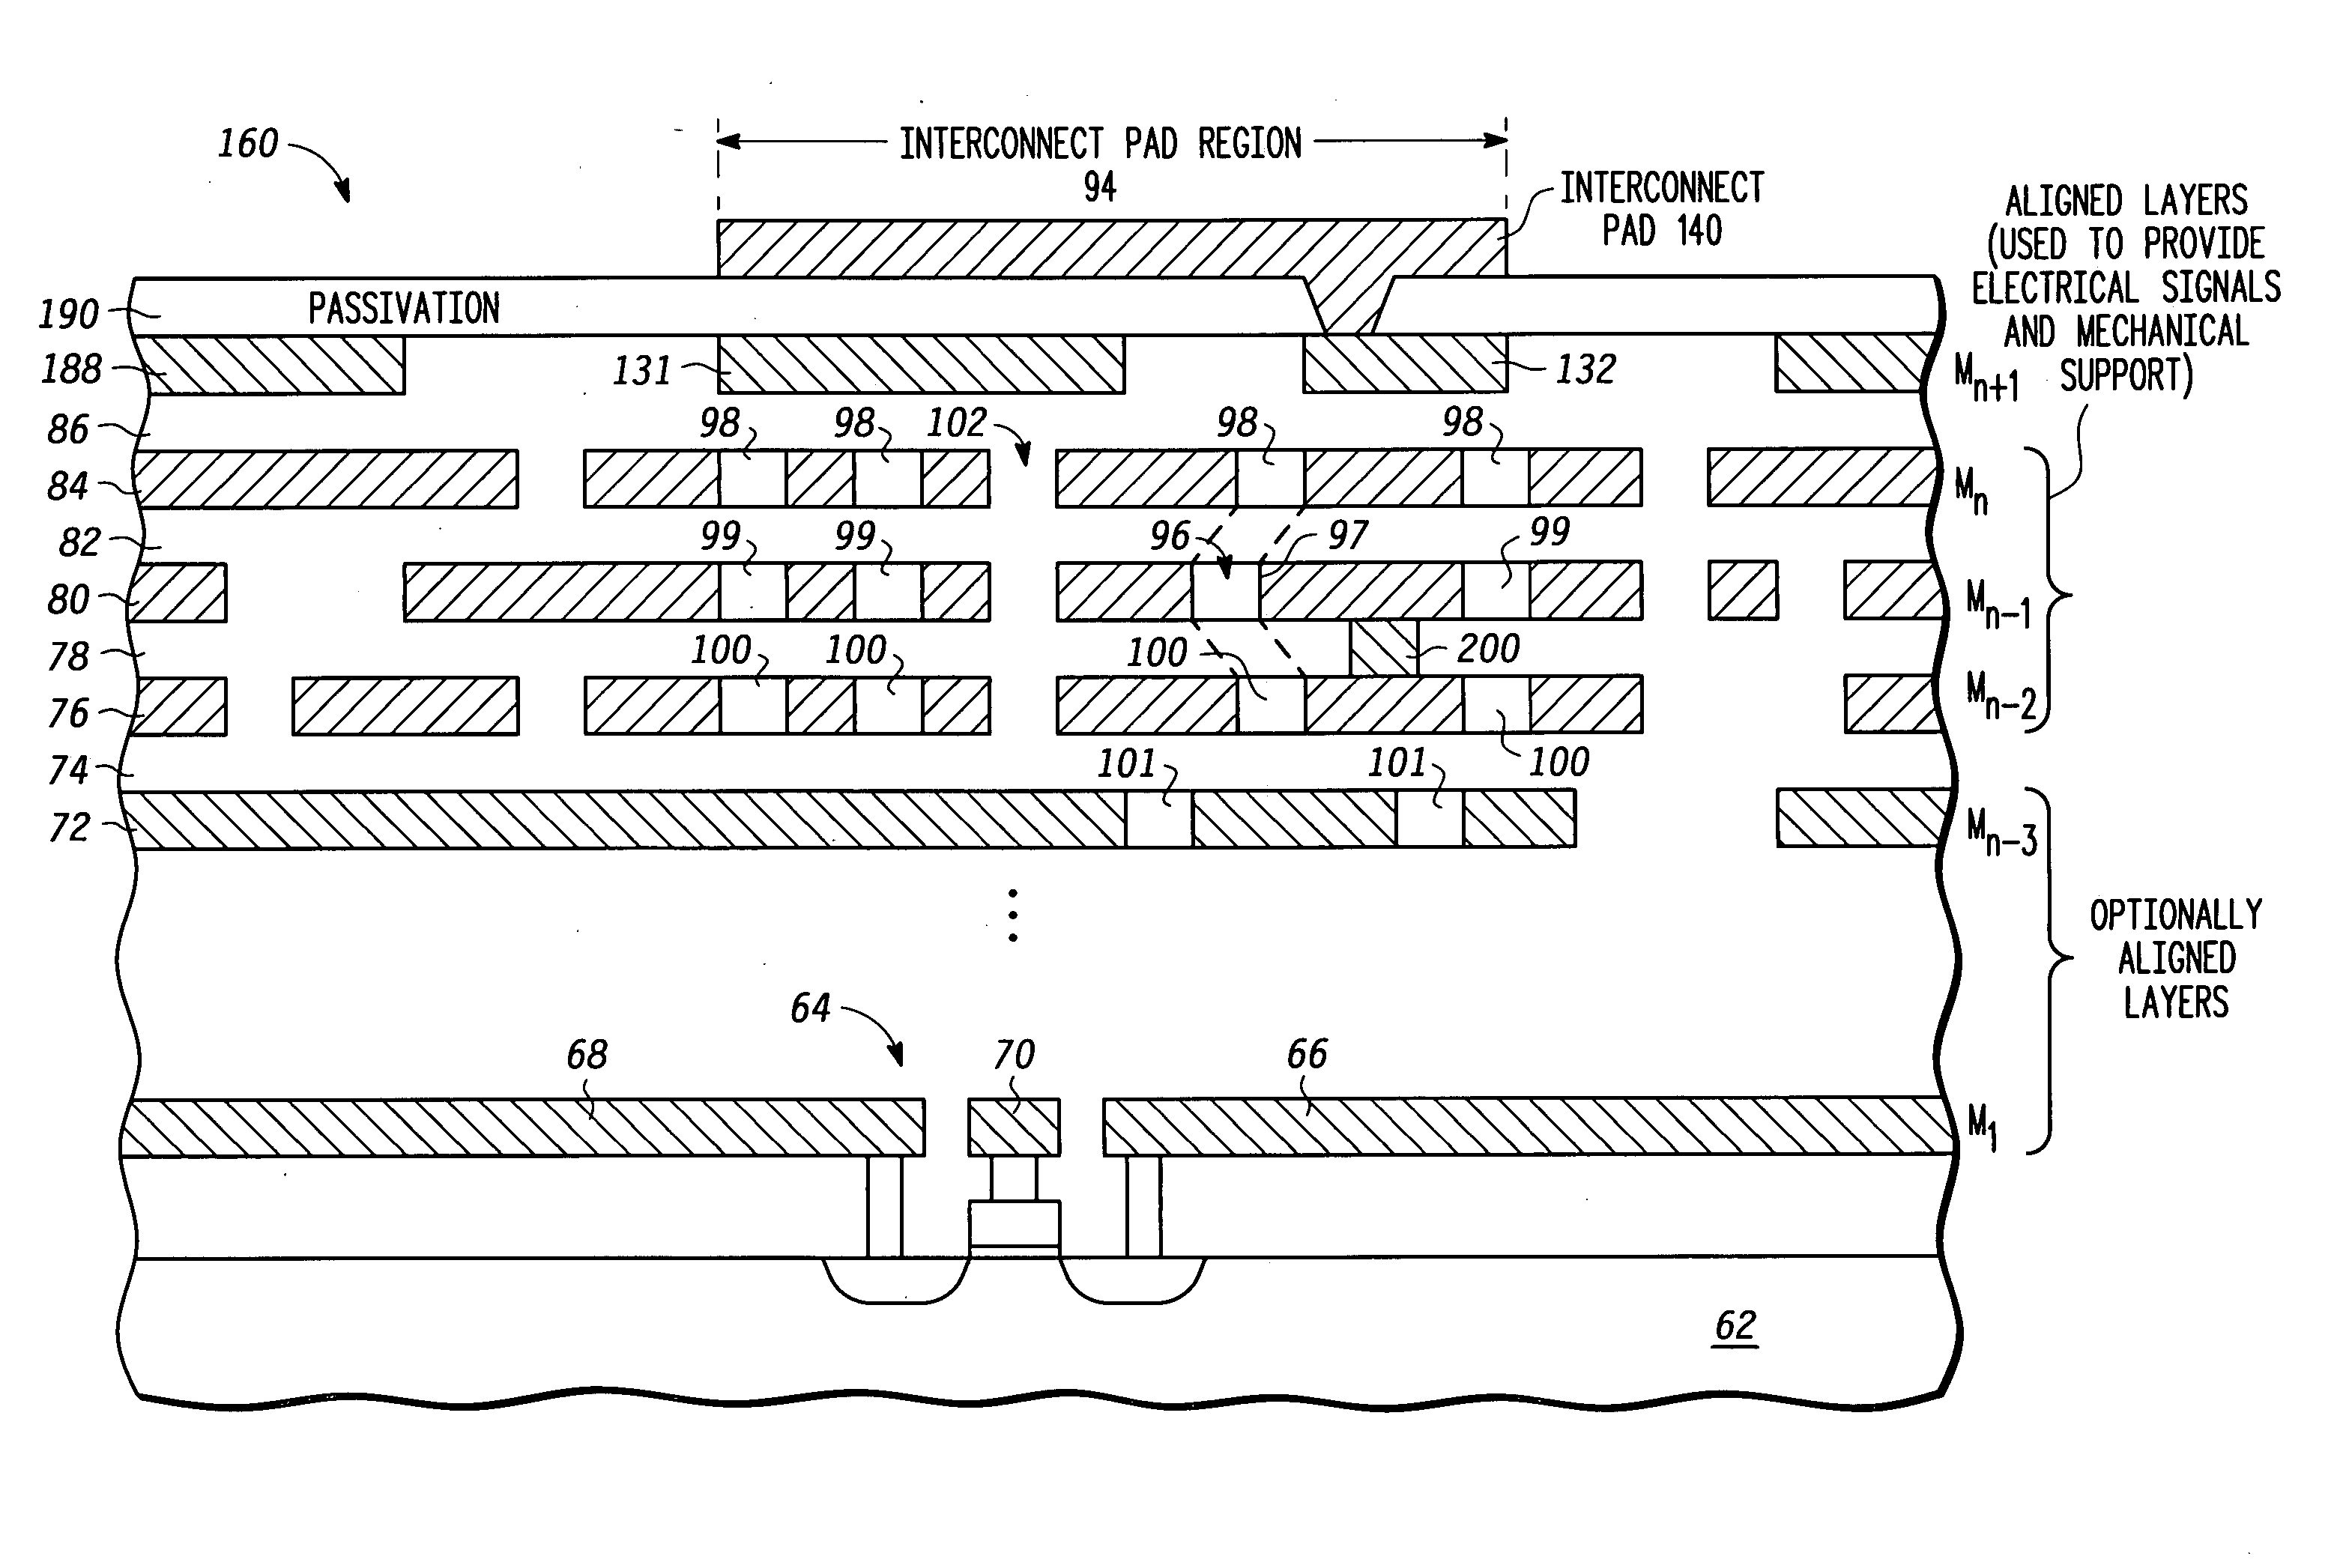 Method and apparatus for providing structural support for interconnect pad while allowing signal conductance